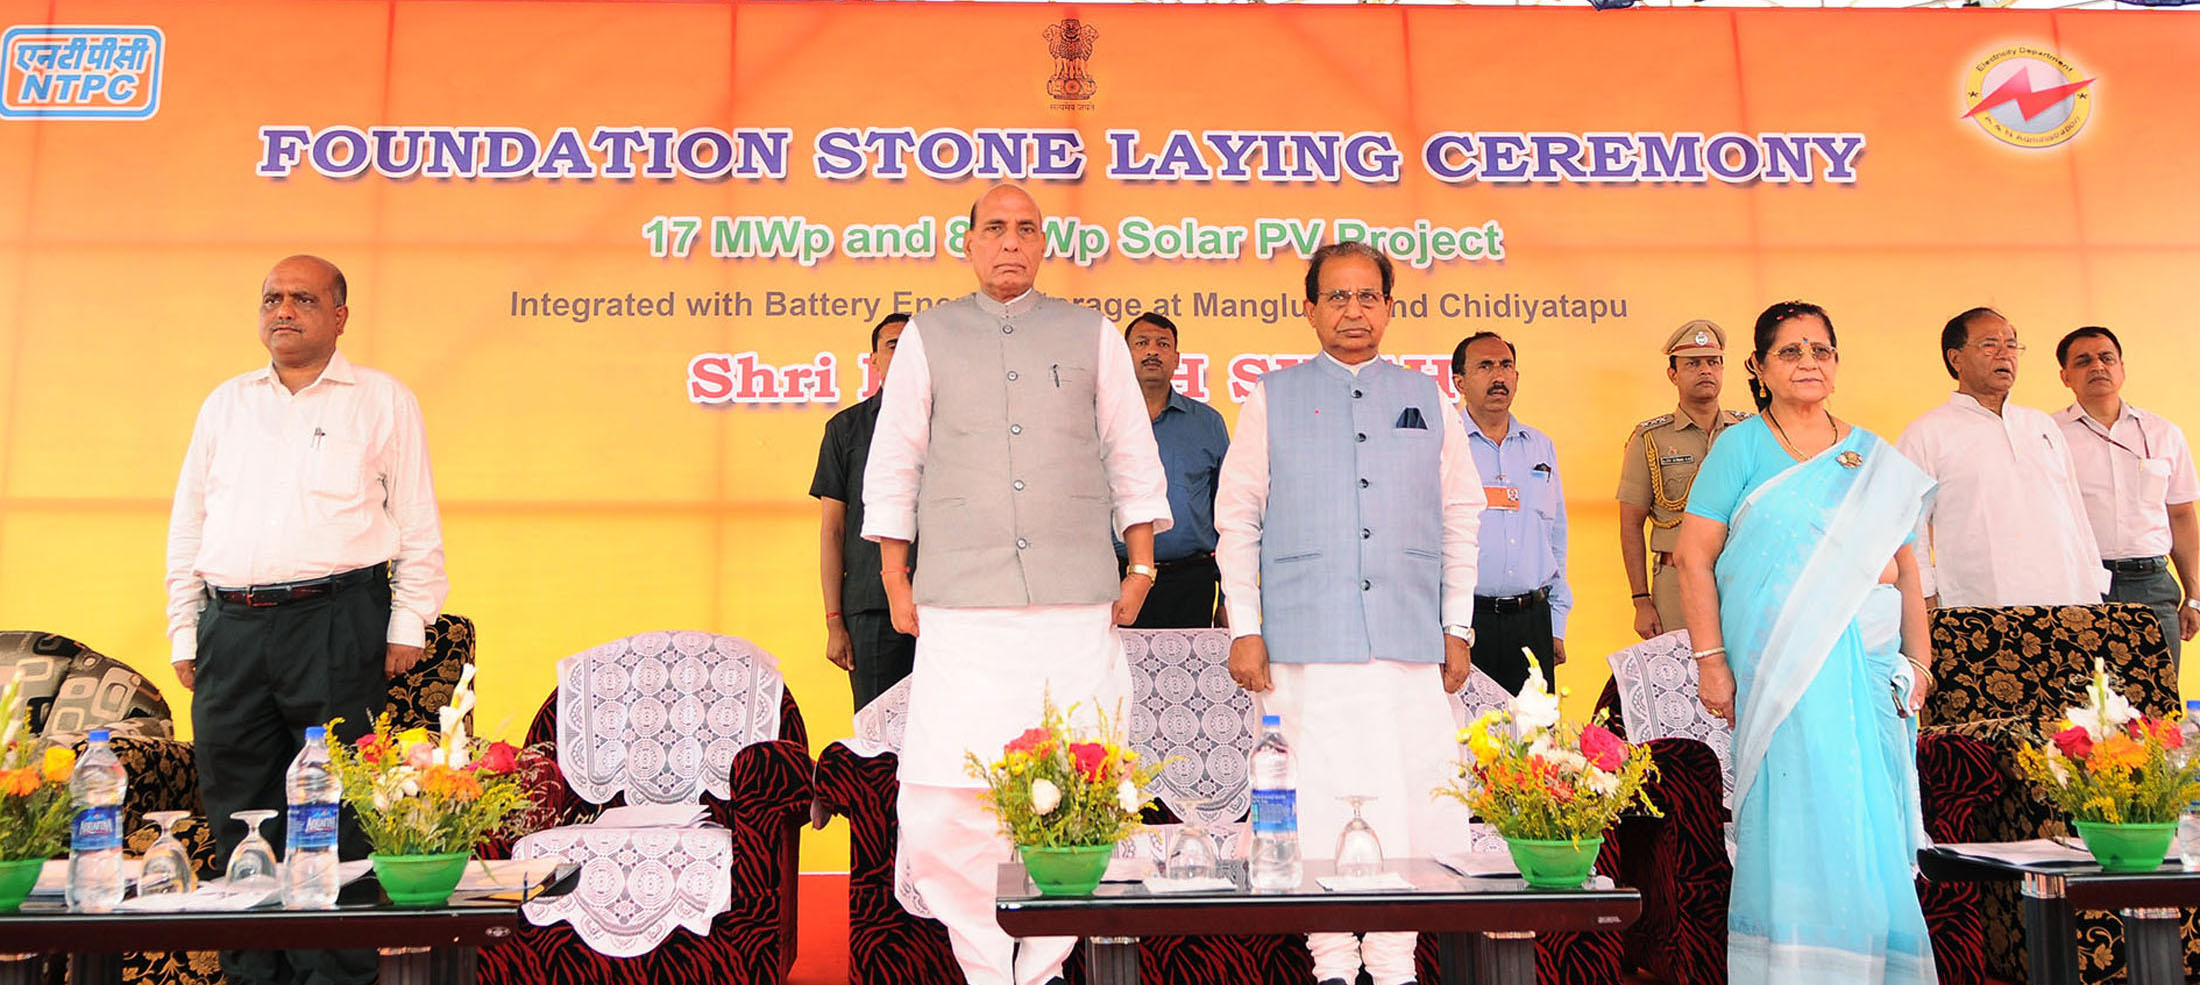 The Union Home Minister, Shri Rajnath Singh at the foundation stone laying ceremony for two solar power plants, in South Andaman on April 07, 2017. 	The Lieutenant Governor of Andaman and Nicobar Islands, Prof. Jagdish Mukhi is also seen.